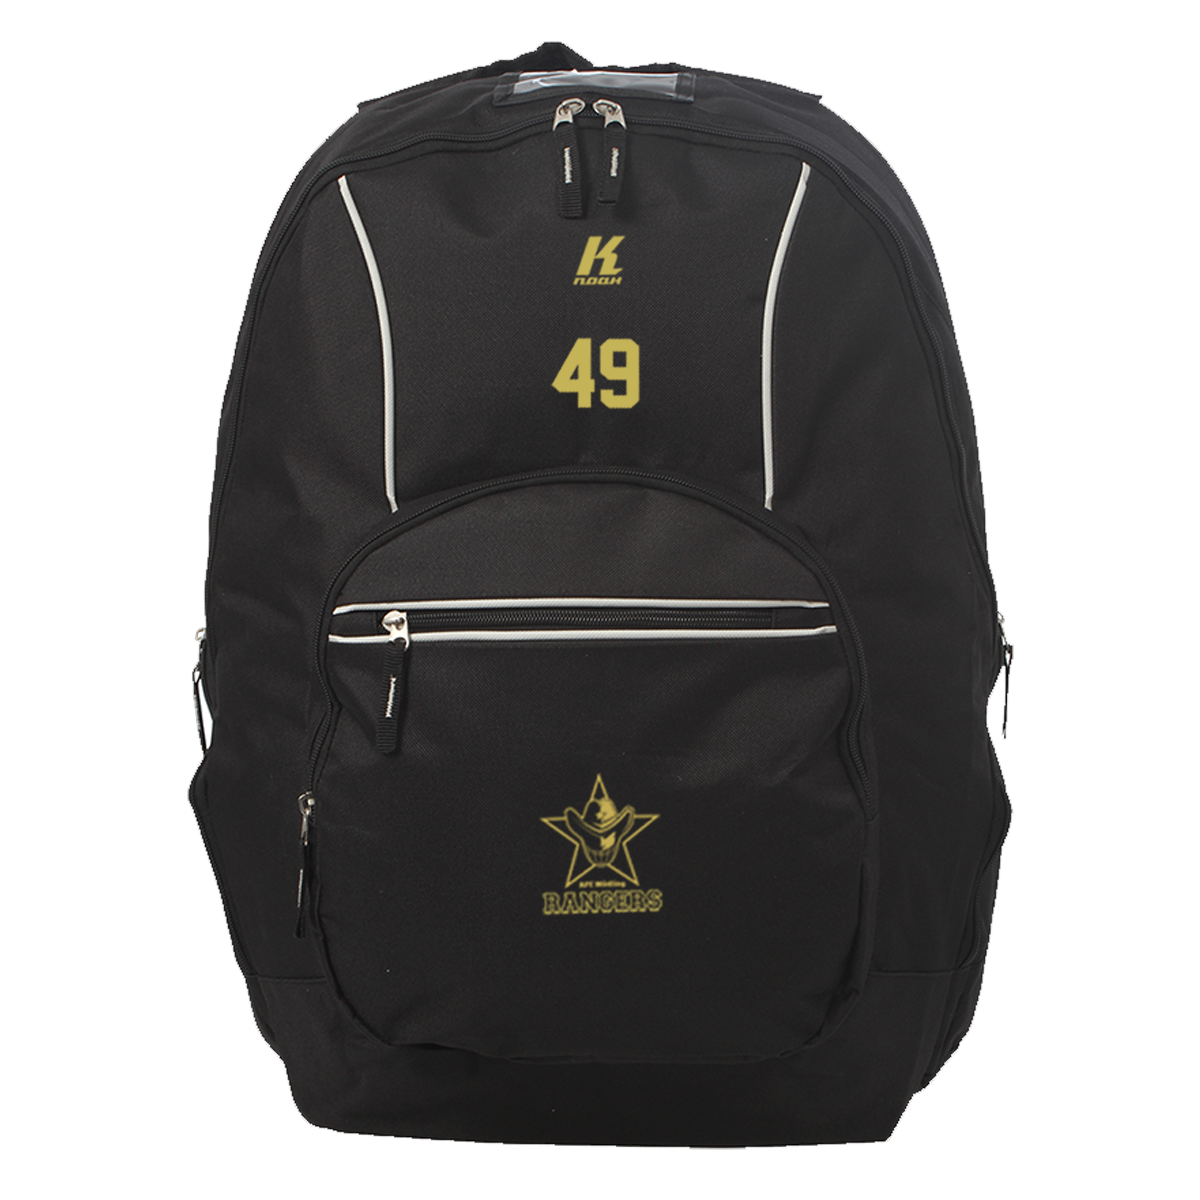 Rangers Heritage Backpack with Playernumber or Initials